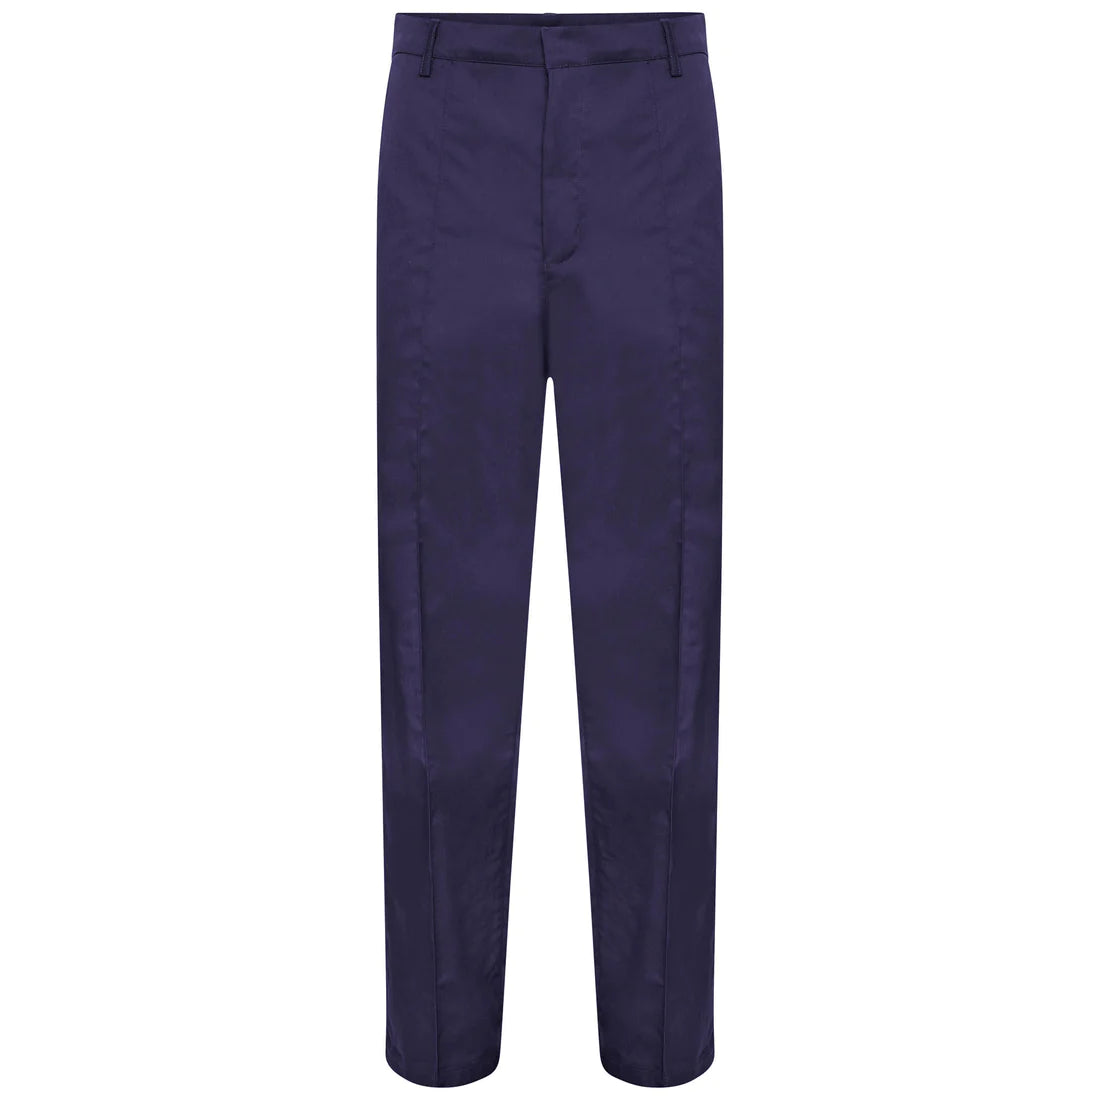 Navy Male Healtcare Trousers - NMPCTP